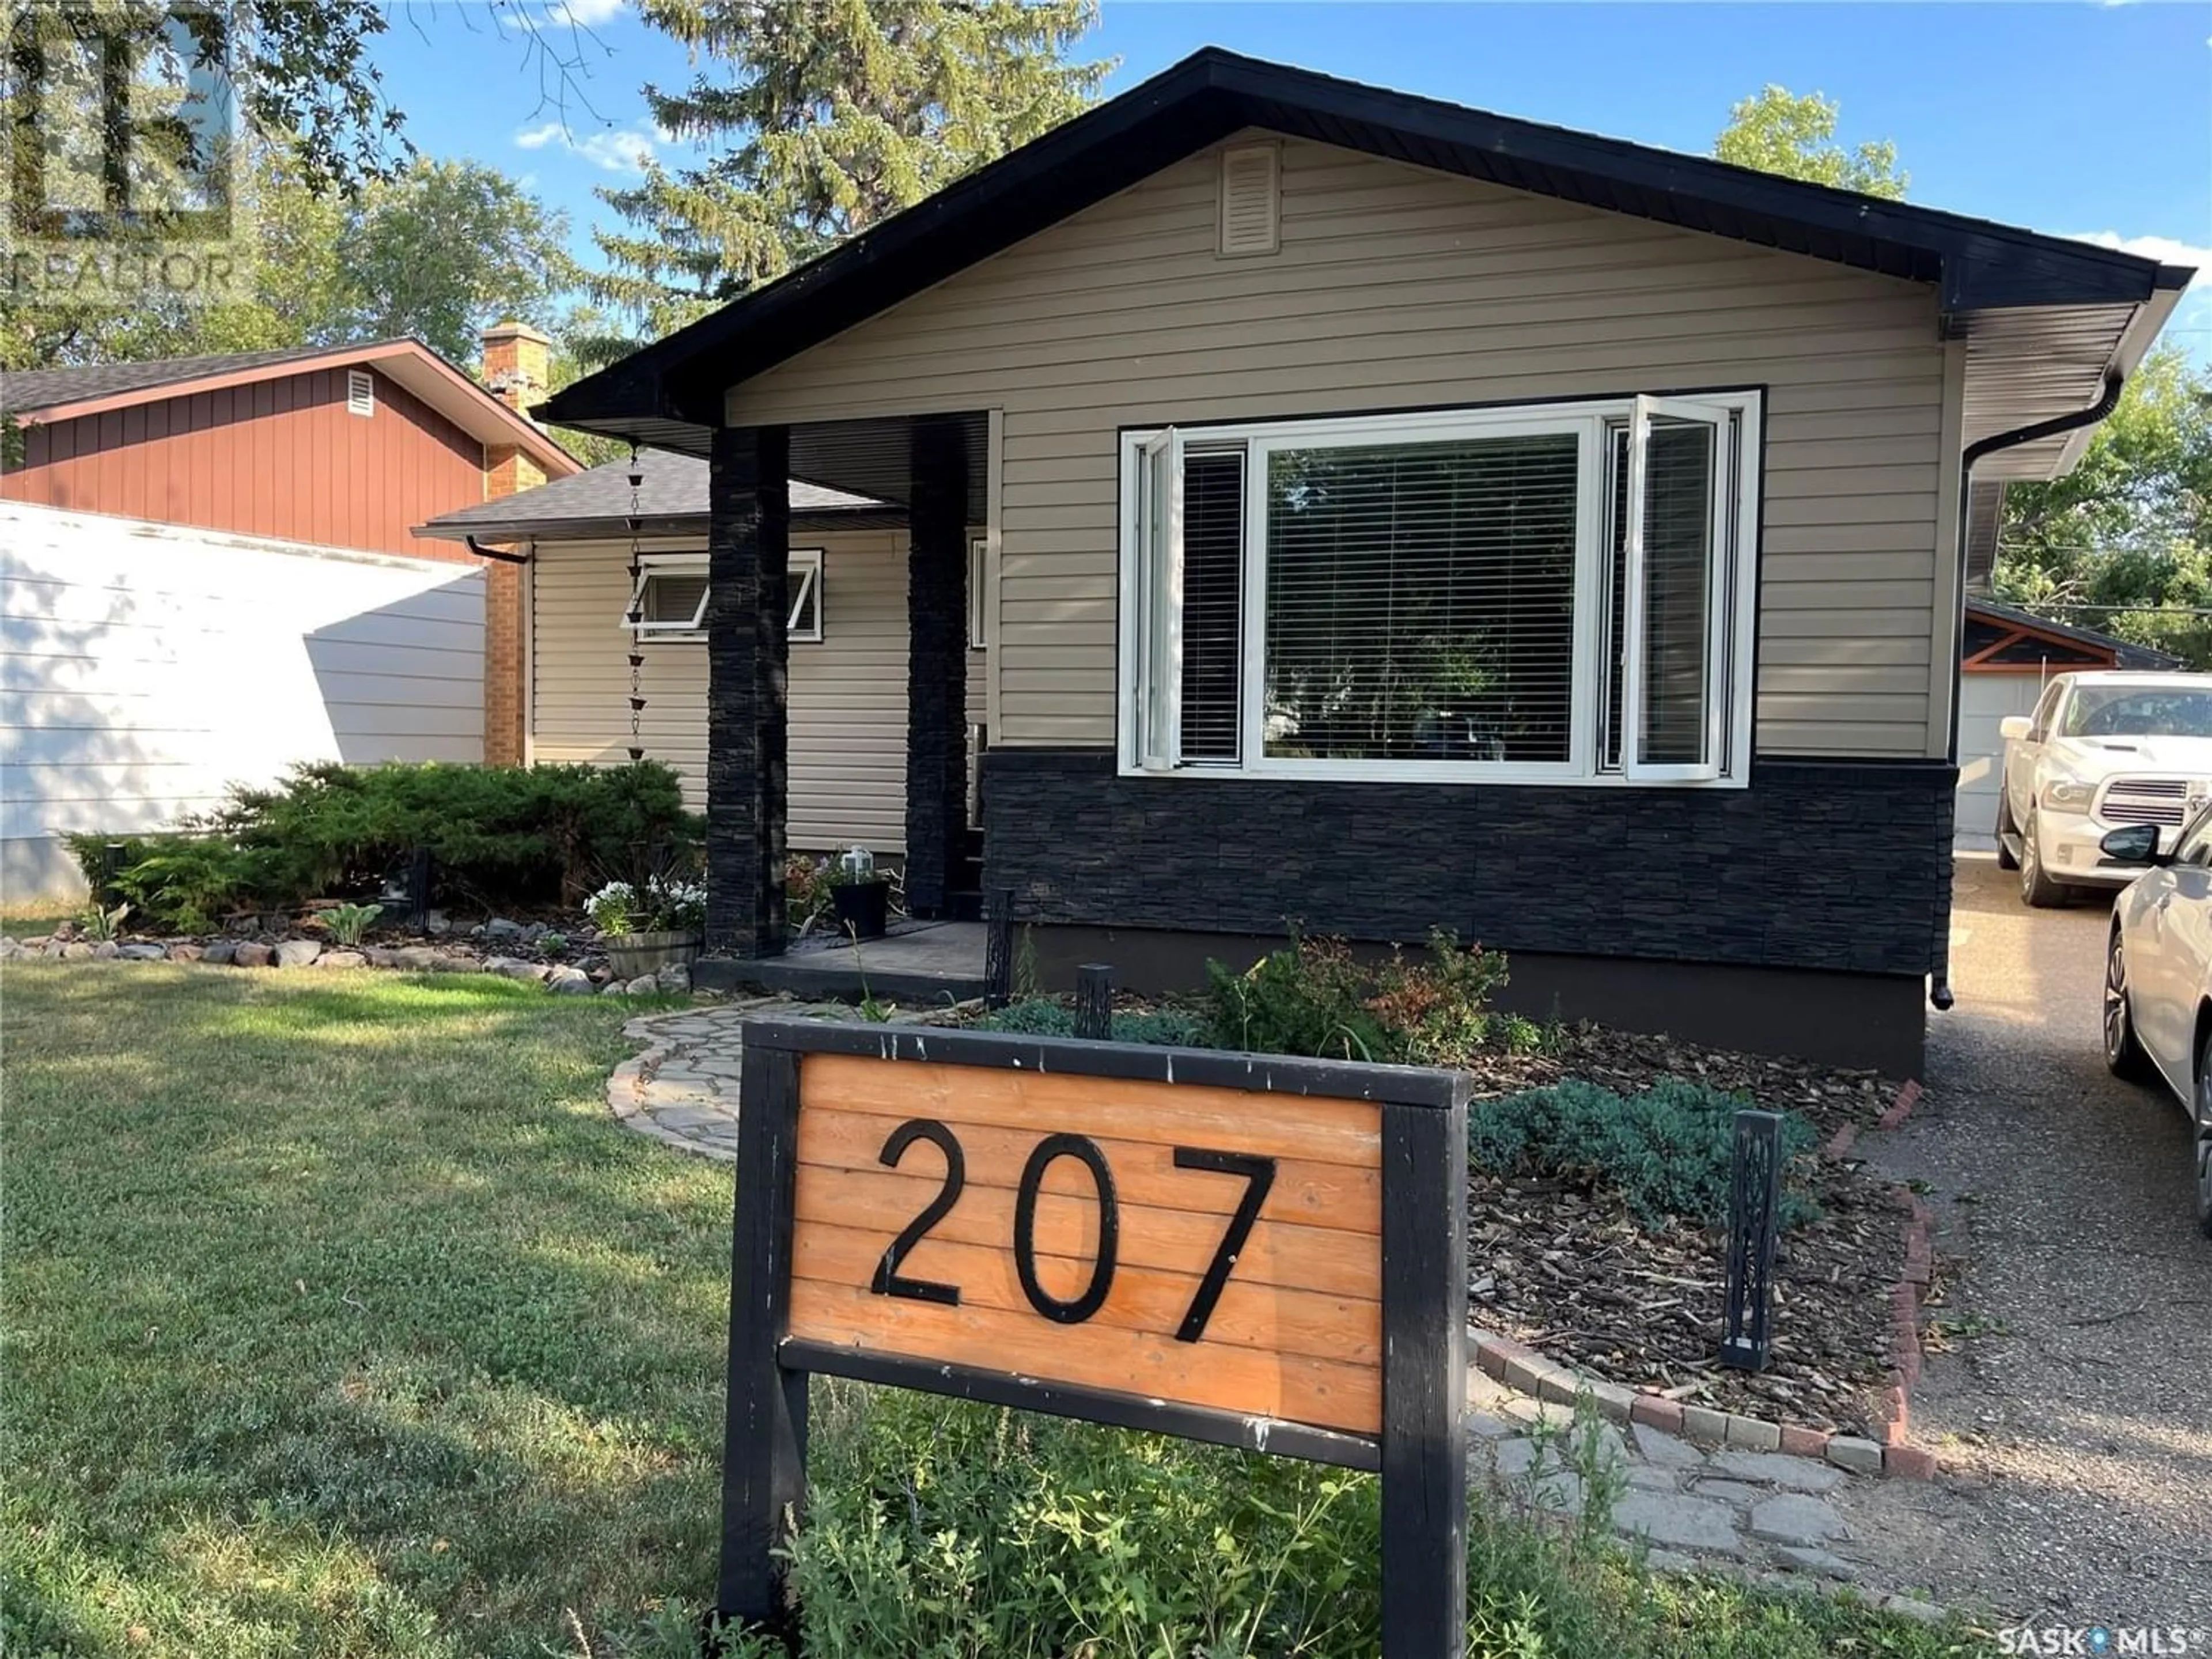 Home with vinyl exterior material for 207 Dominion ROAD, Assiniboia Saskatchewan S0H0B0